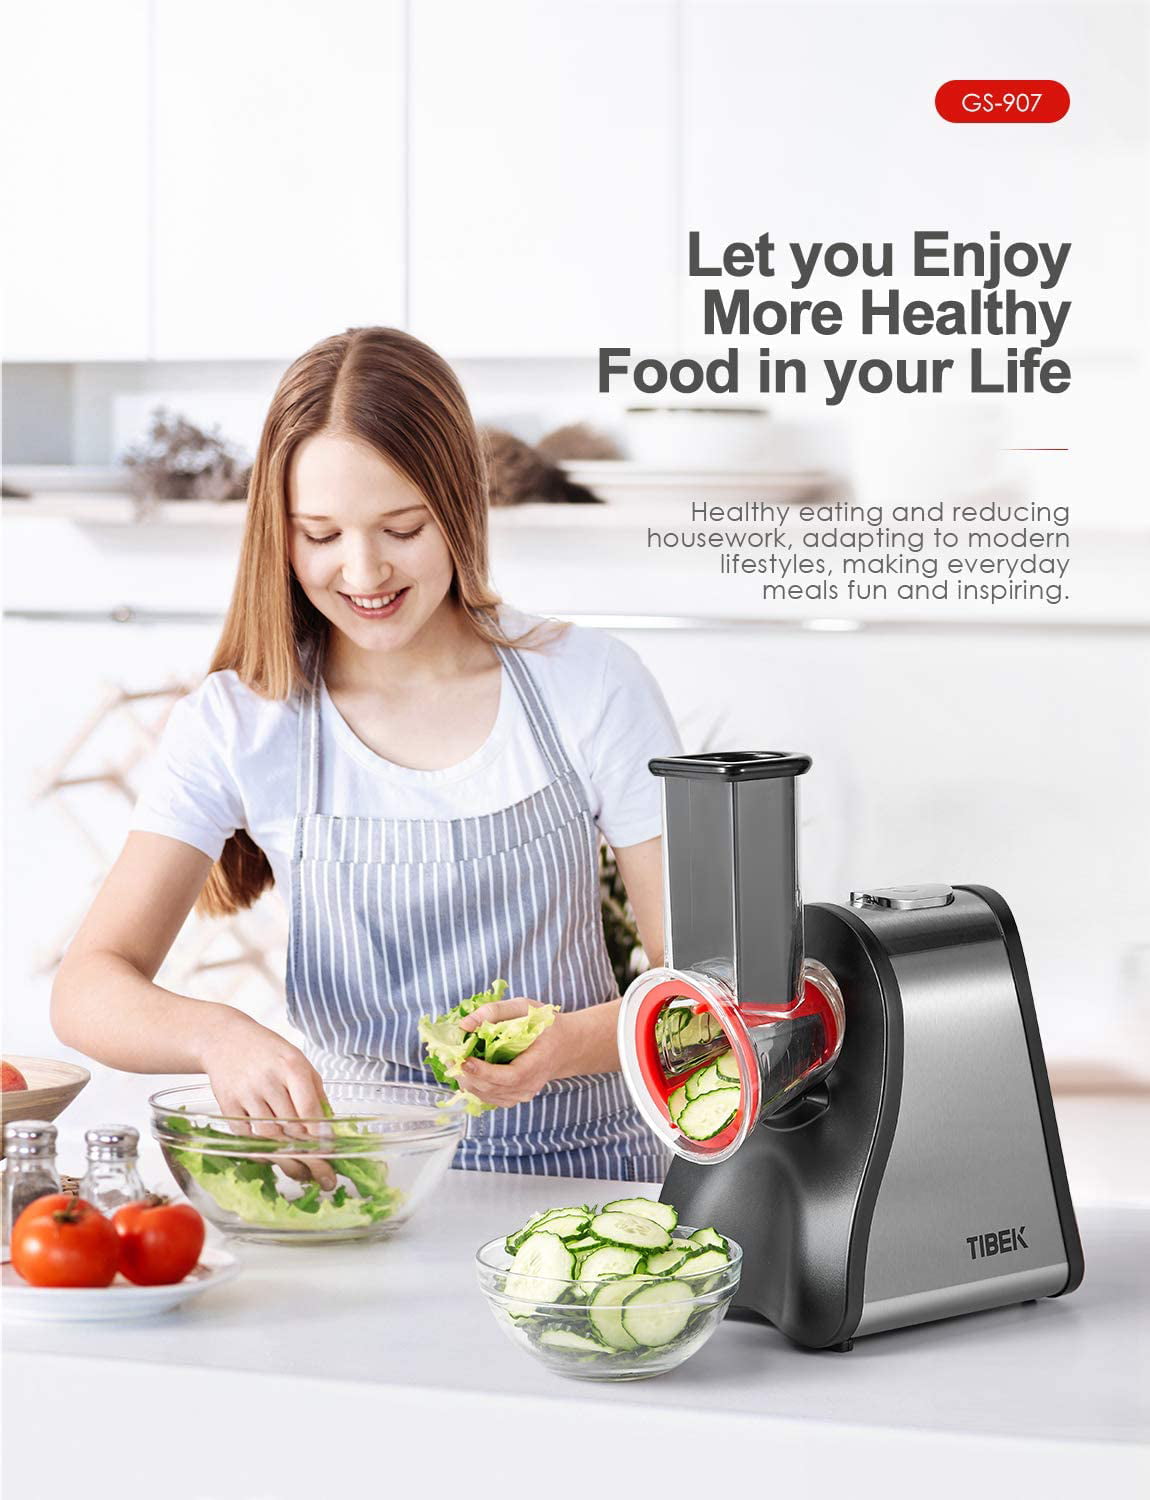  FOHERE Electric Cheese Grater Salad Maker, Electric Slicer  Shredder for Home Kitchen Use, One-Touch Easy Control, Electric Grater for  Vegetables, Cheeses and Nuts, BPA-Free, Red: Home & Kitchen